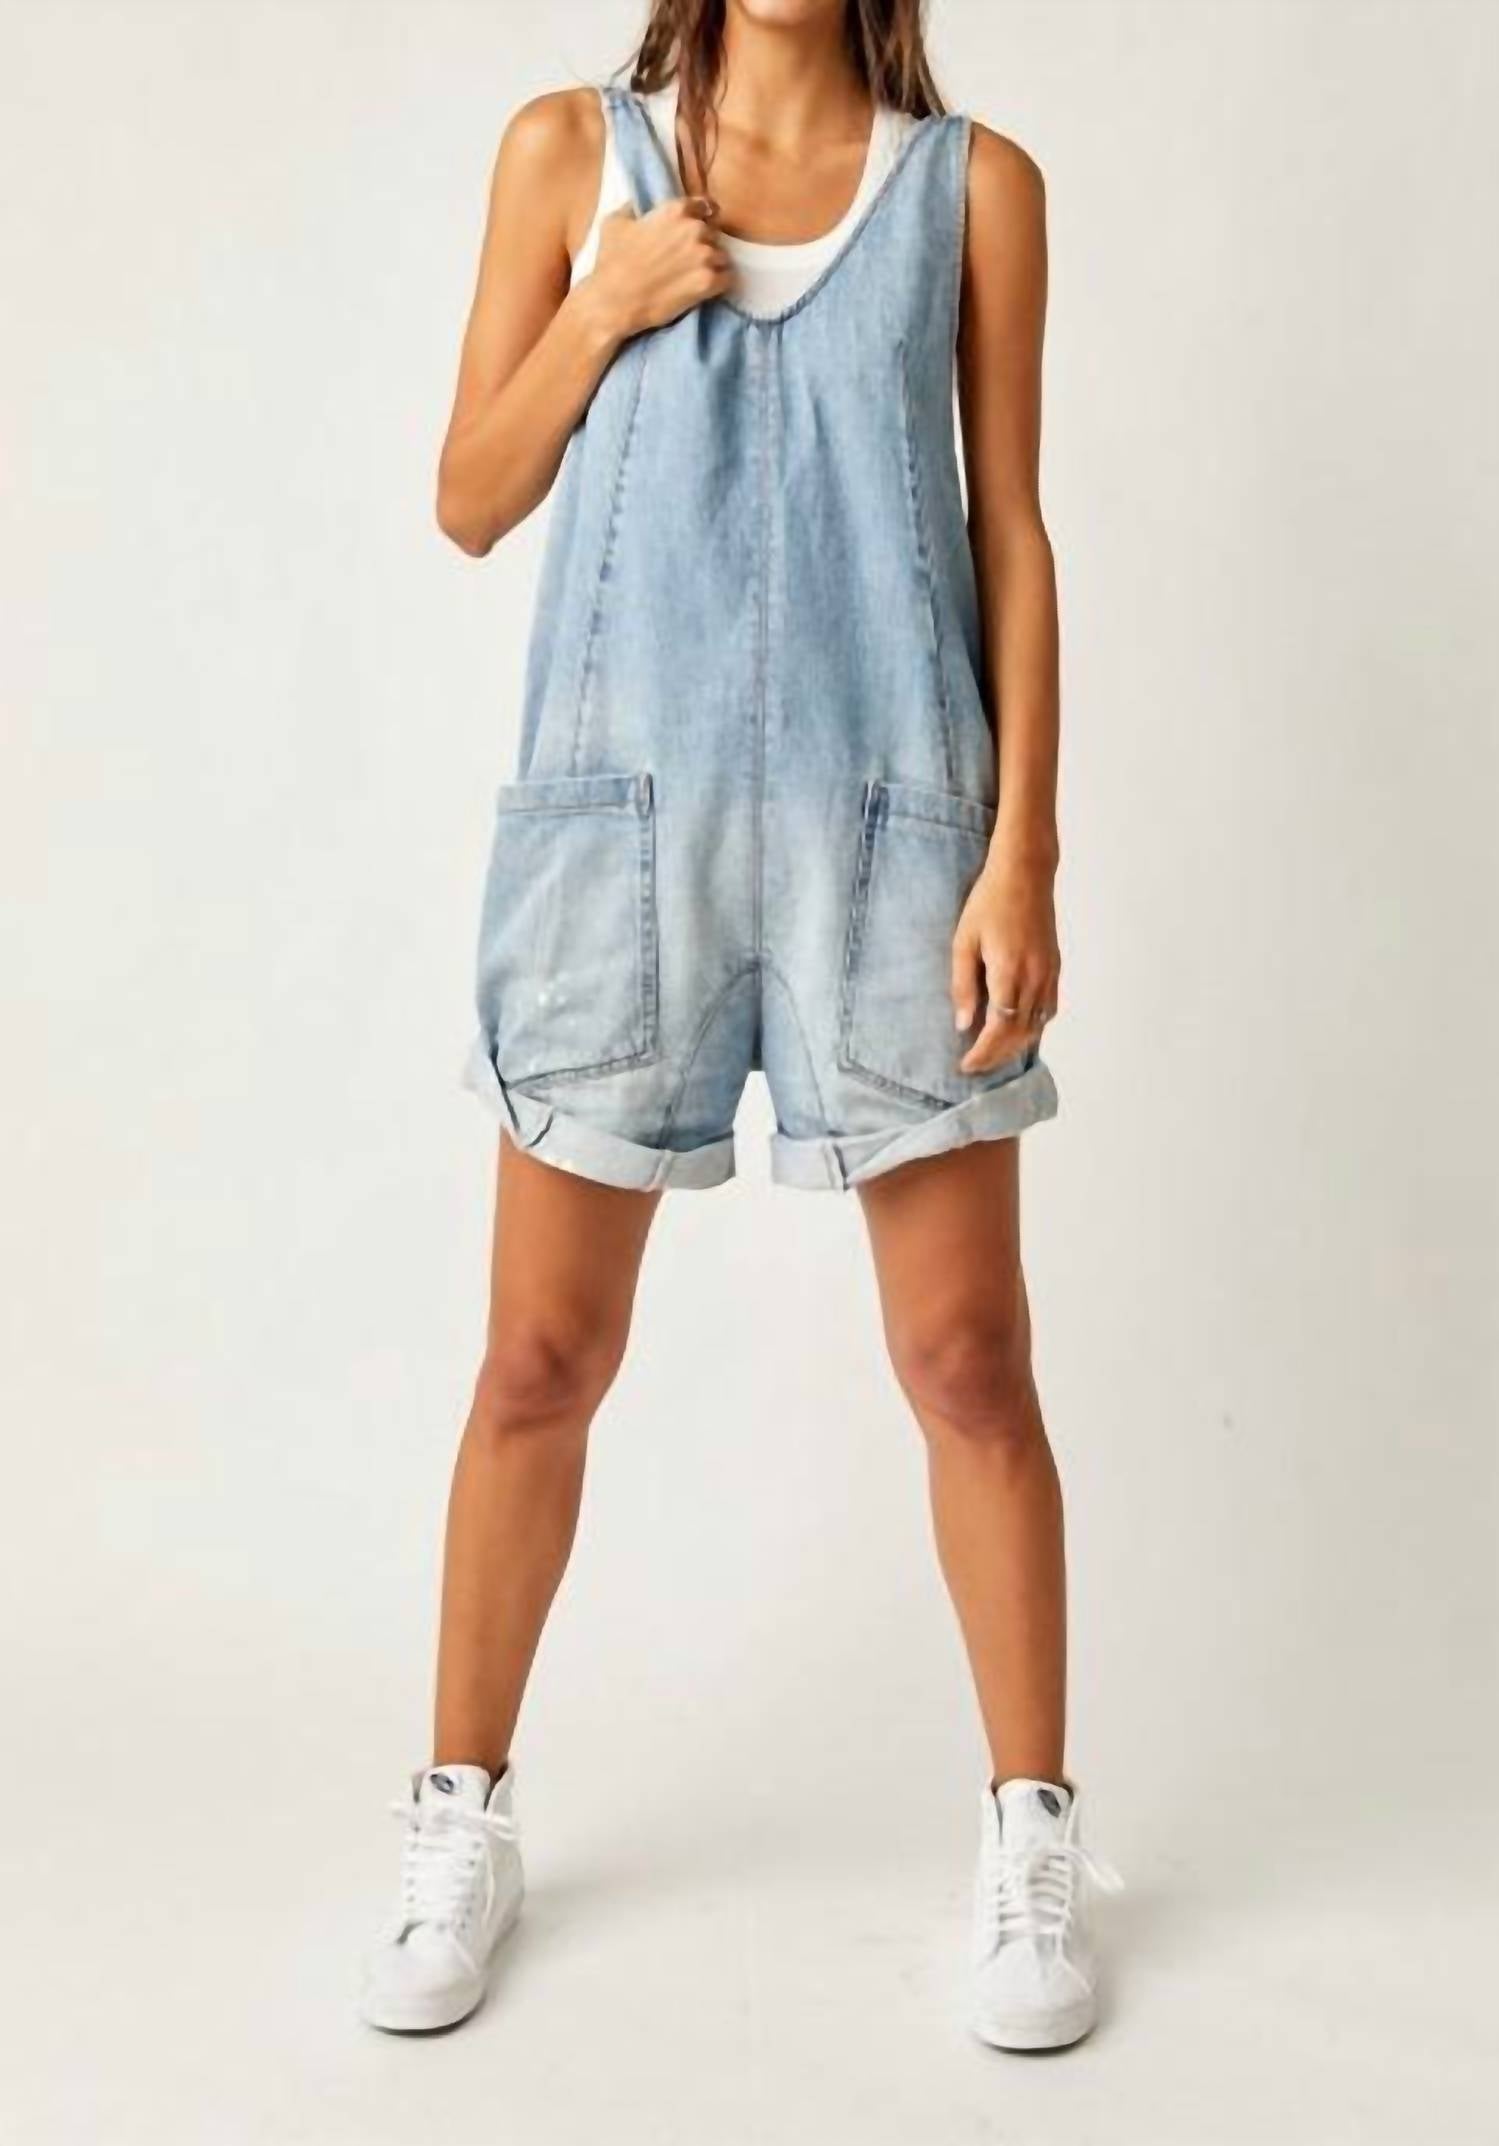 FREE PEOPLE HIGH ROLLER SHORTALL IN BLUE